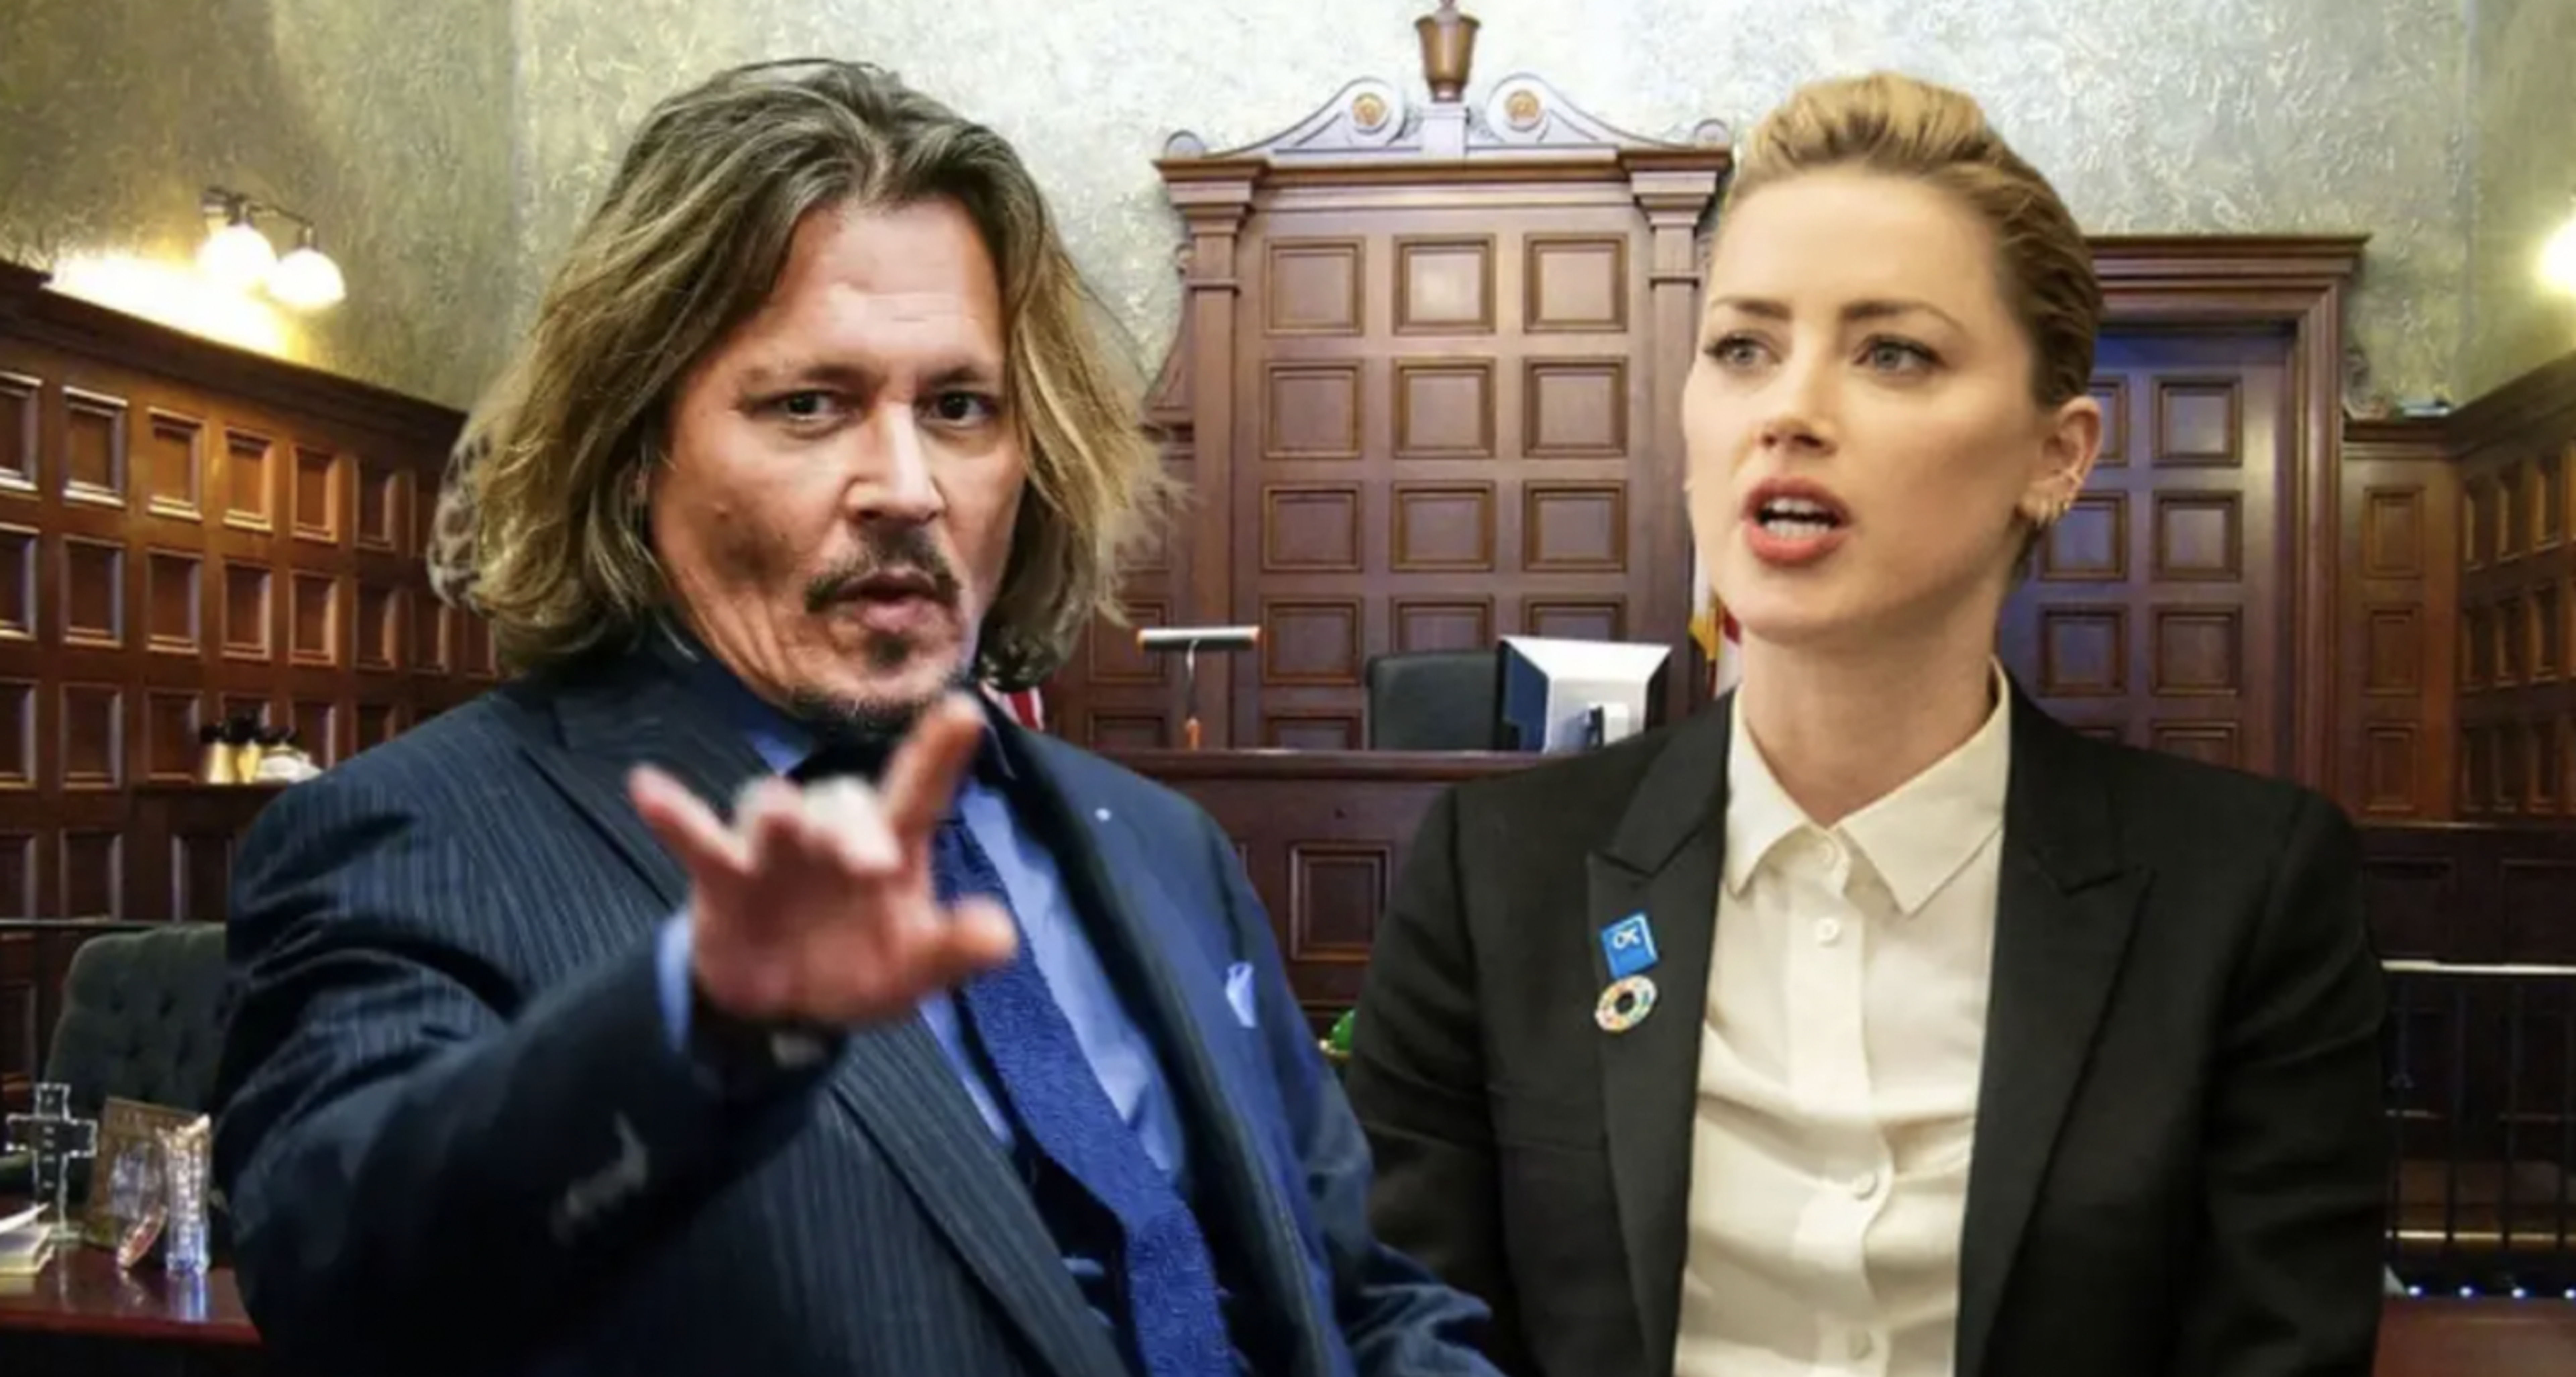 New Turn In Johnny Depp-Amber Heard Trial: Depp Fire Backs With His Own Appeal